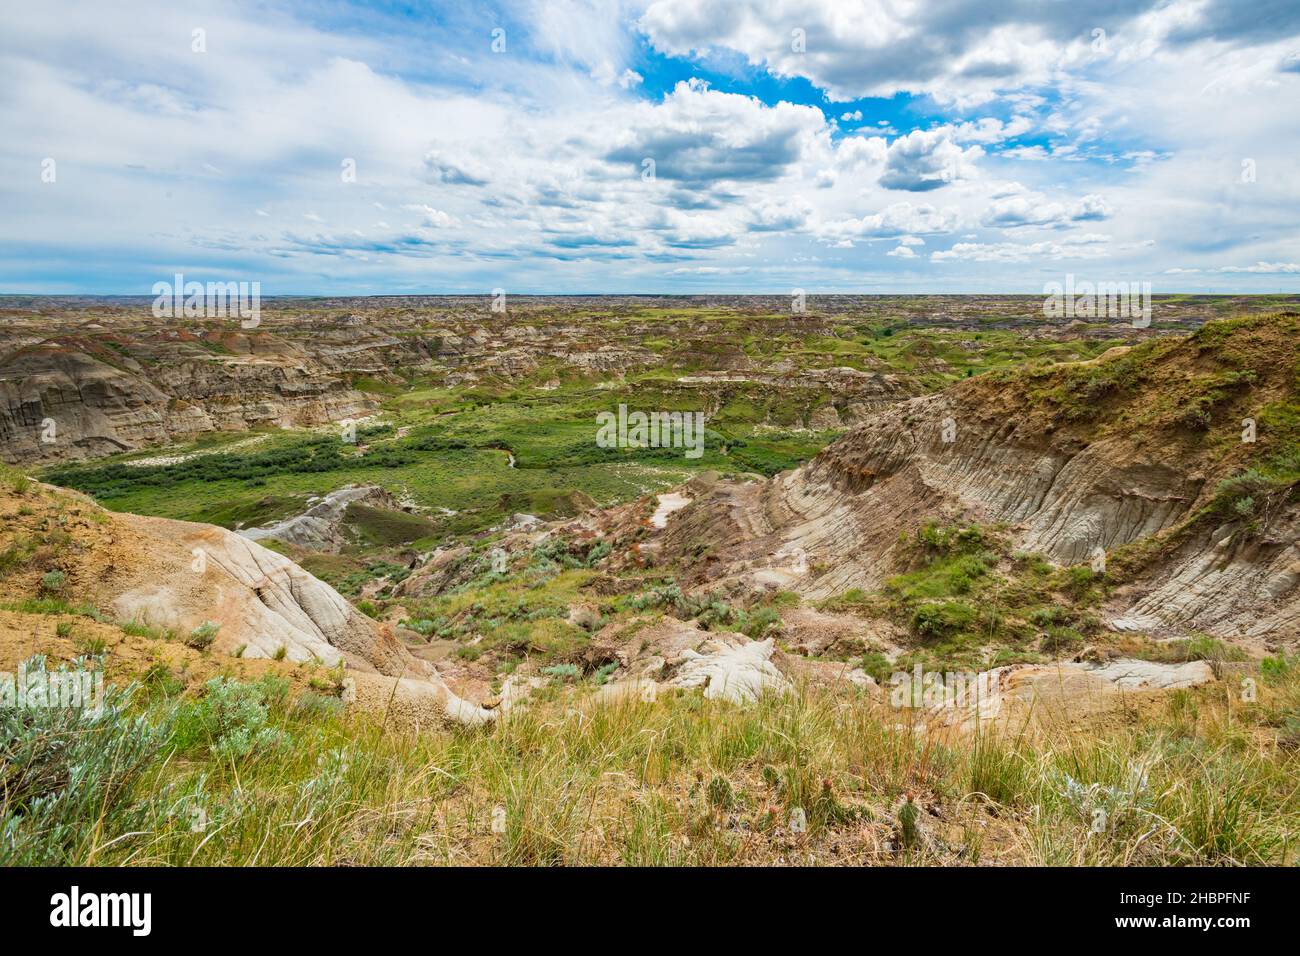 Scenic Dinosaur Provincial Park in the arid badlands of Alberta Canada in the heat of summer. Stock Photo